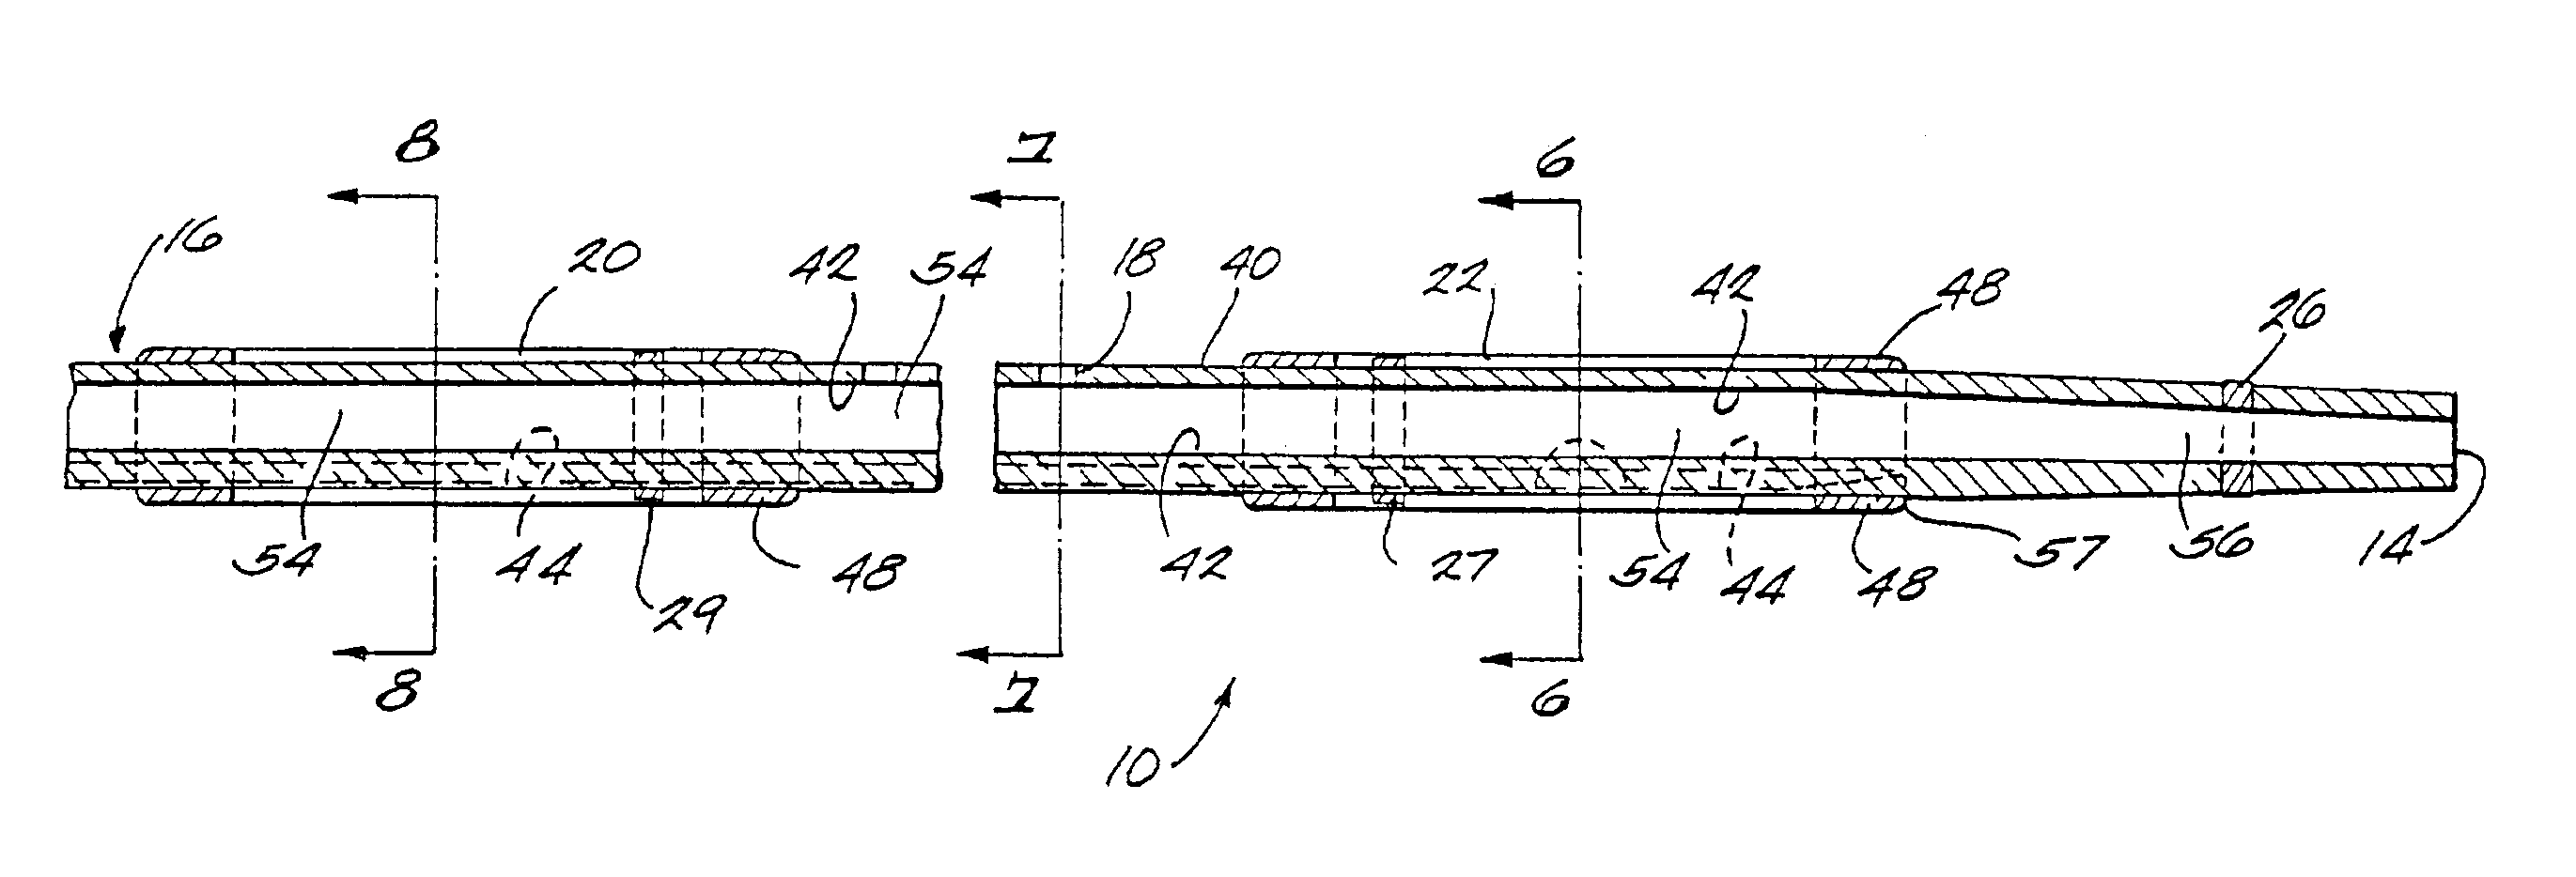 Thrombolysis catheter system with fixed length infusion zone